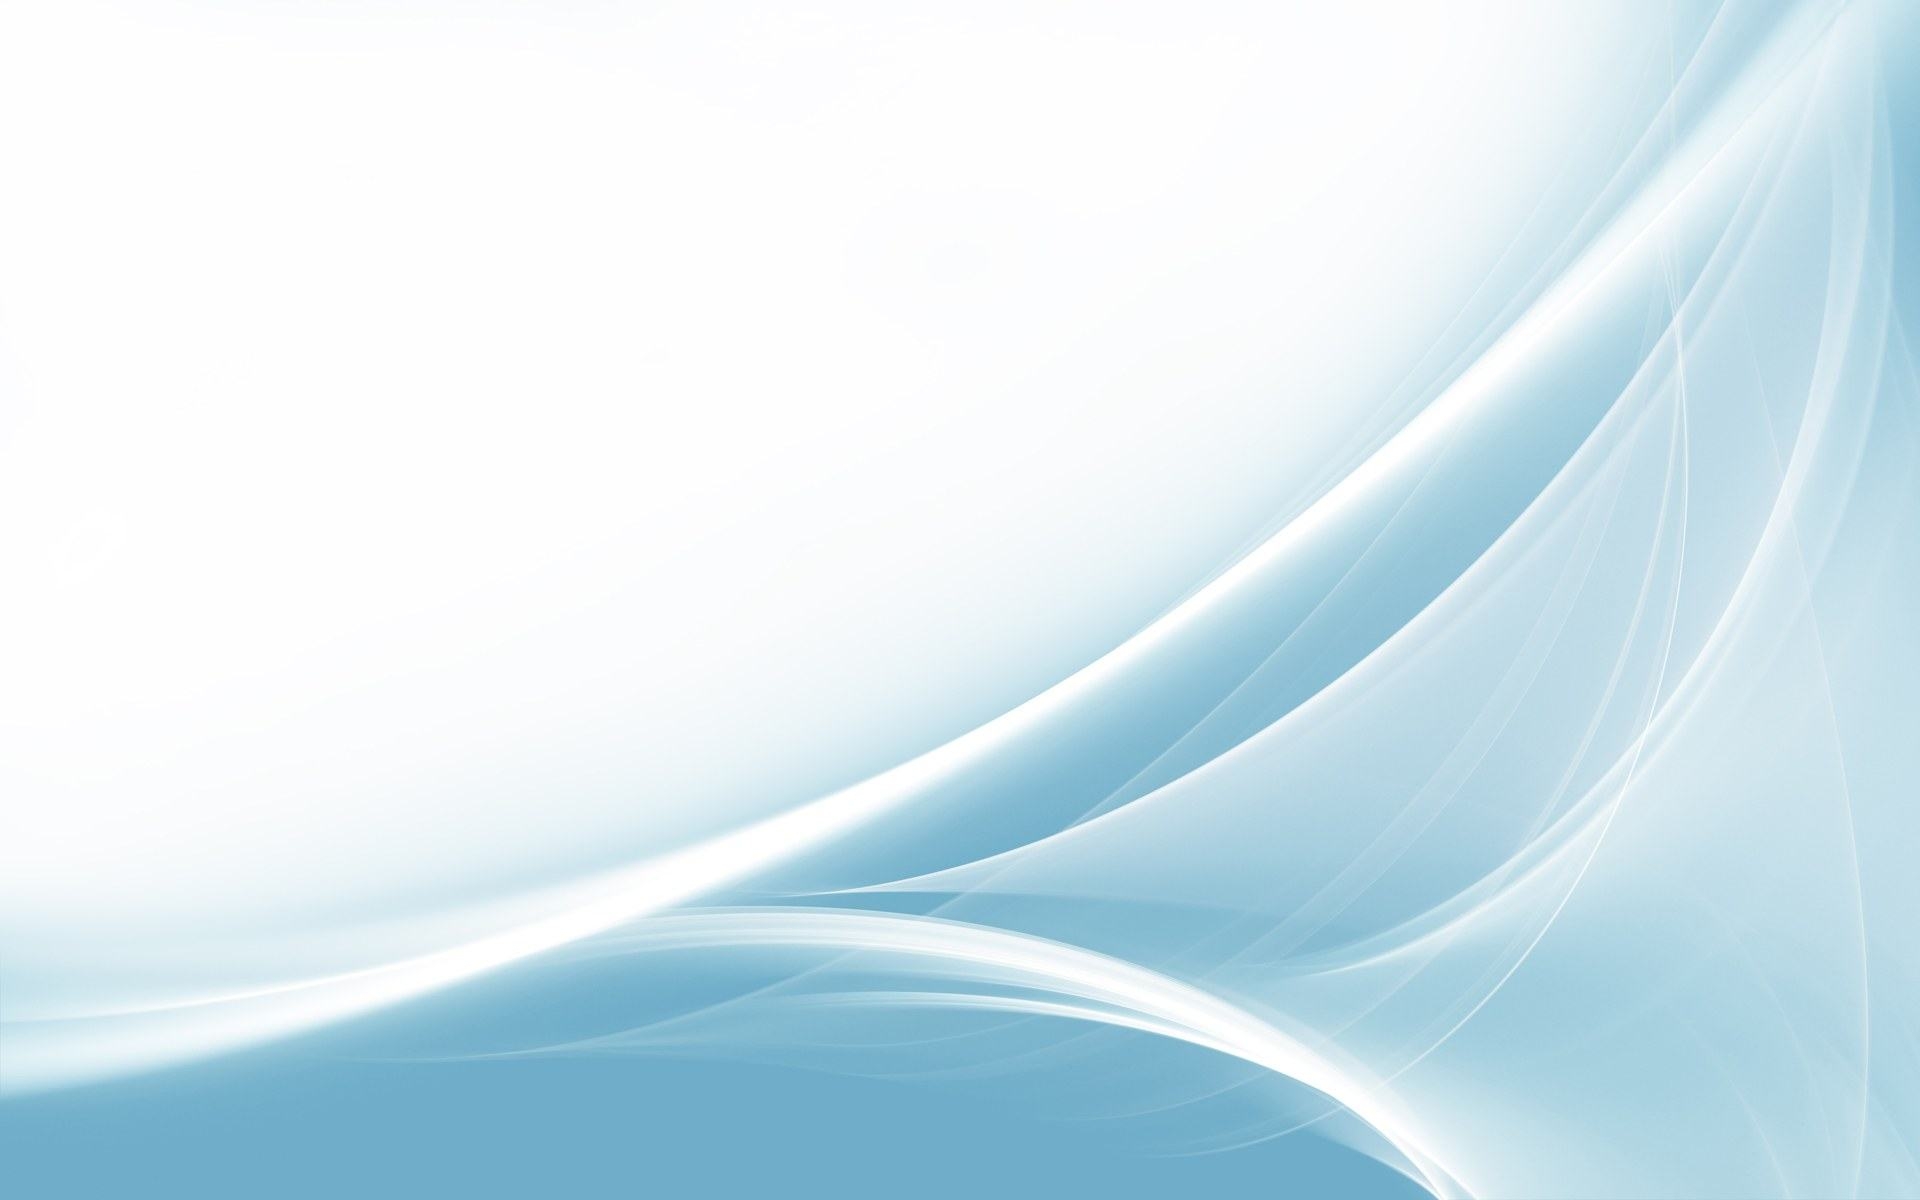 Wallpapers Backgrounds   Abstract Blue backgrounds